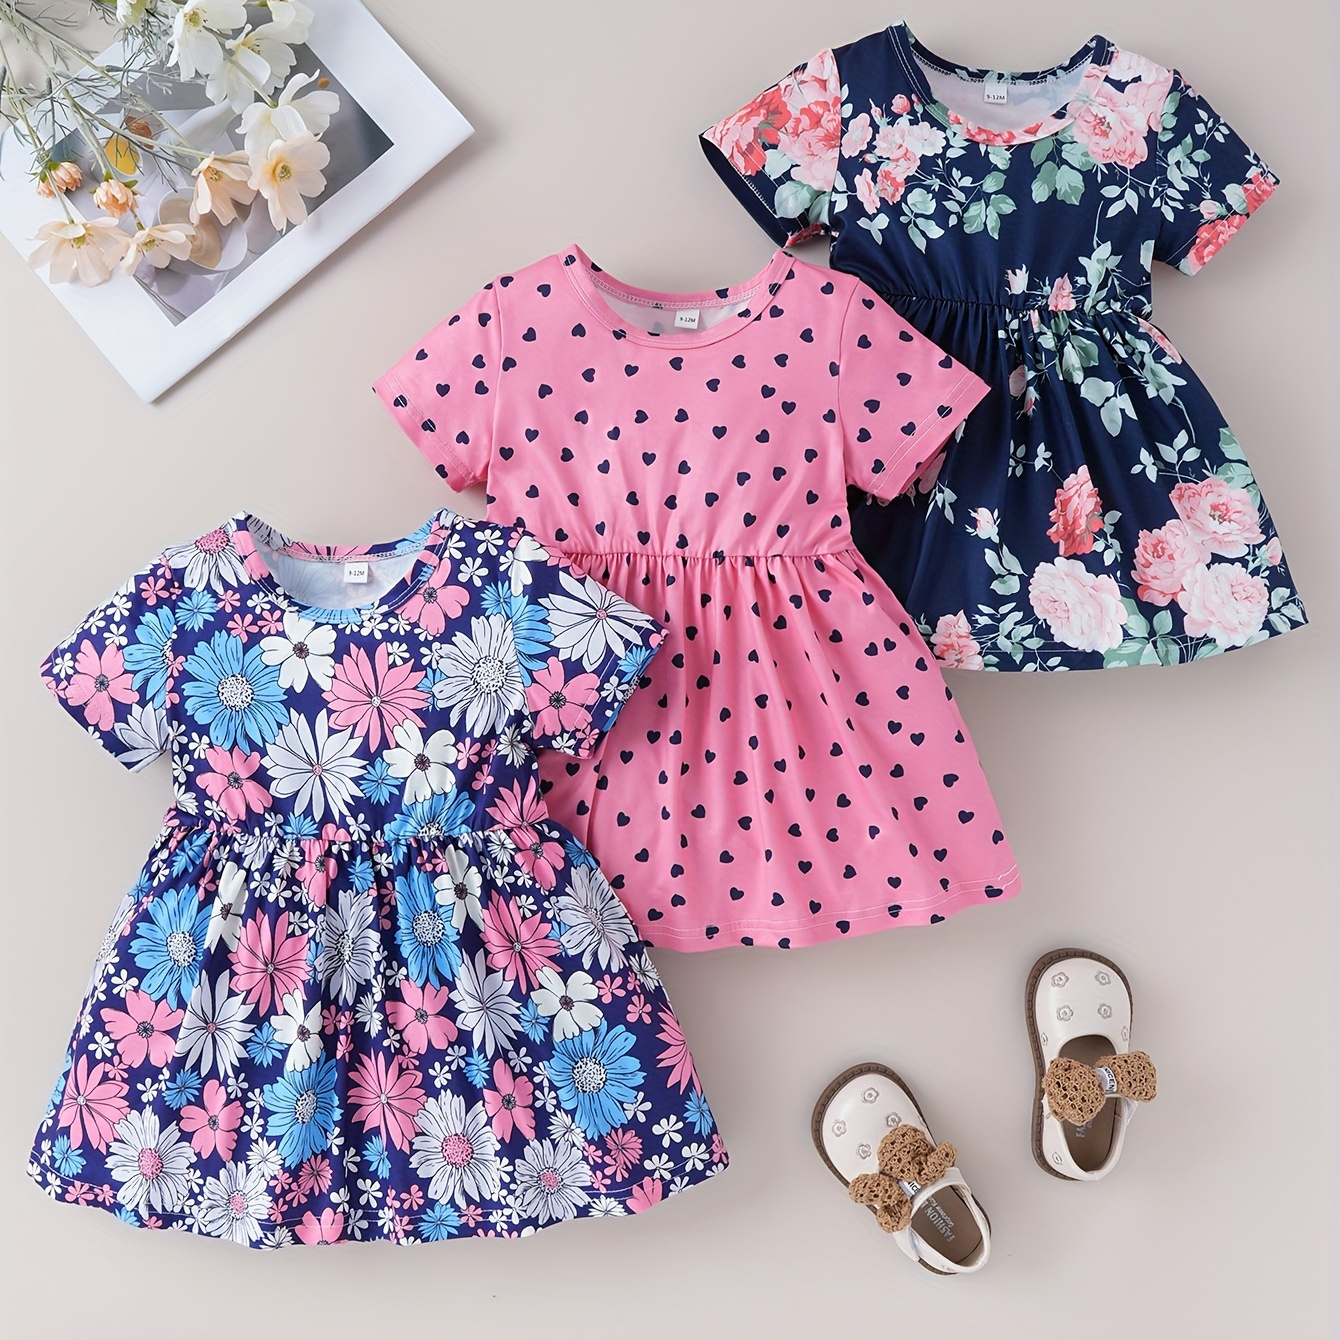 

3pcs Baby Girls Causal Short Sleeve Ruffle Heart Dots Floral Print Dress, Cute Holiday Trendy Comfy Baby Girls Summer Outfits Clothes